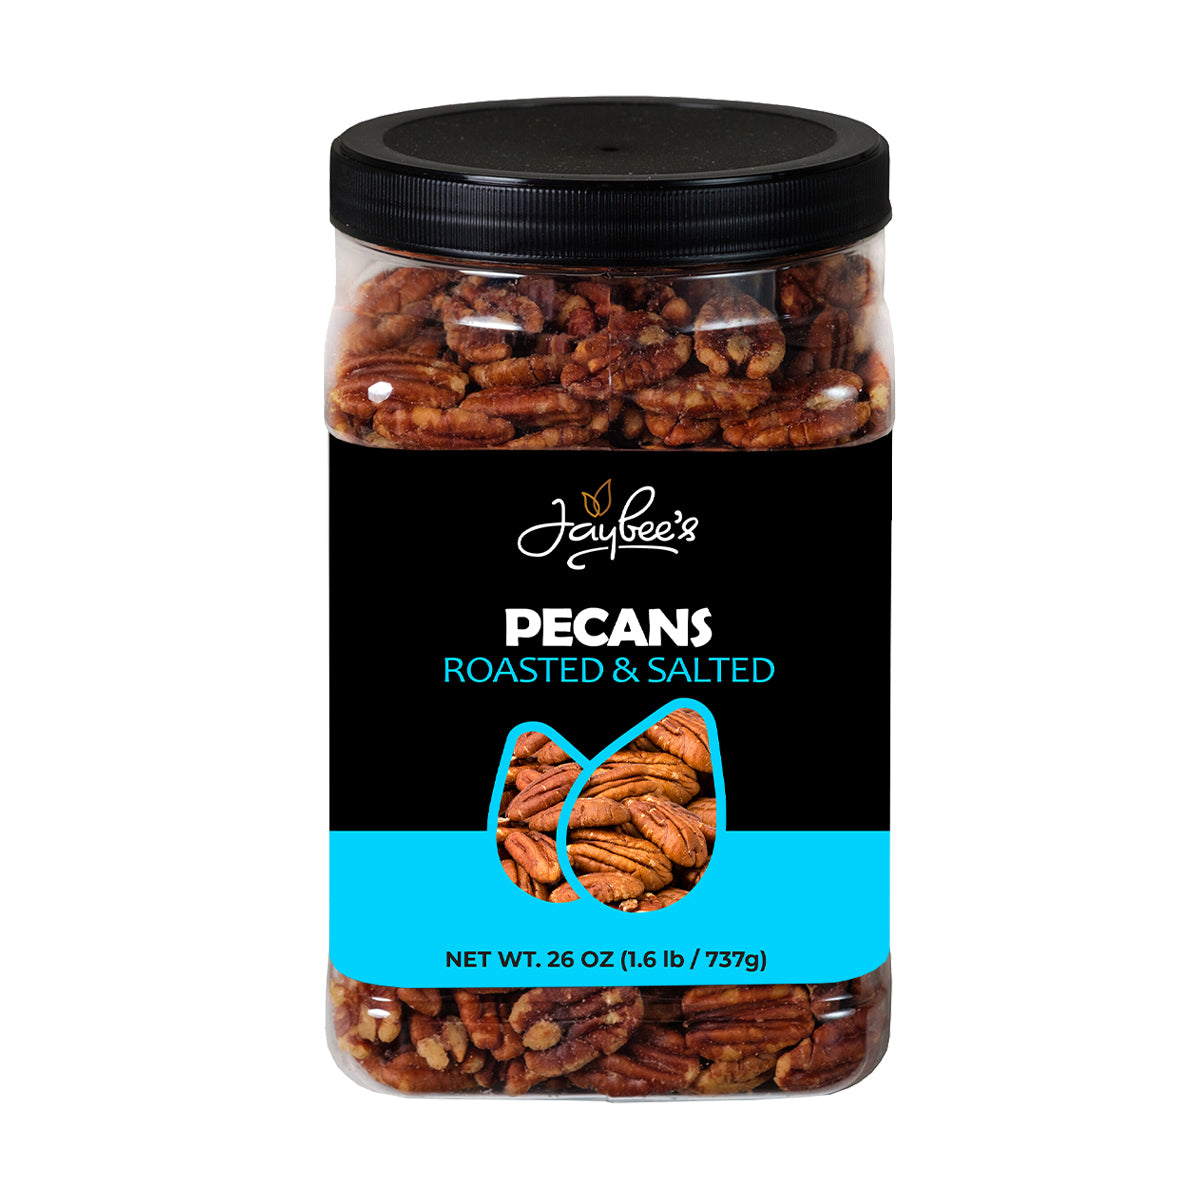 Pecans - Roasted & Salted